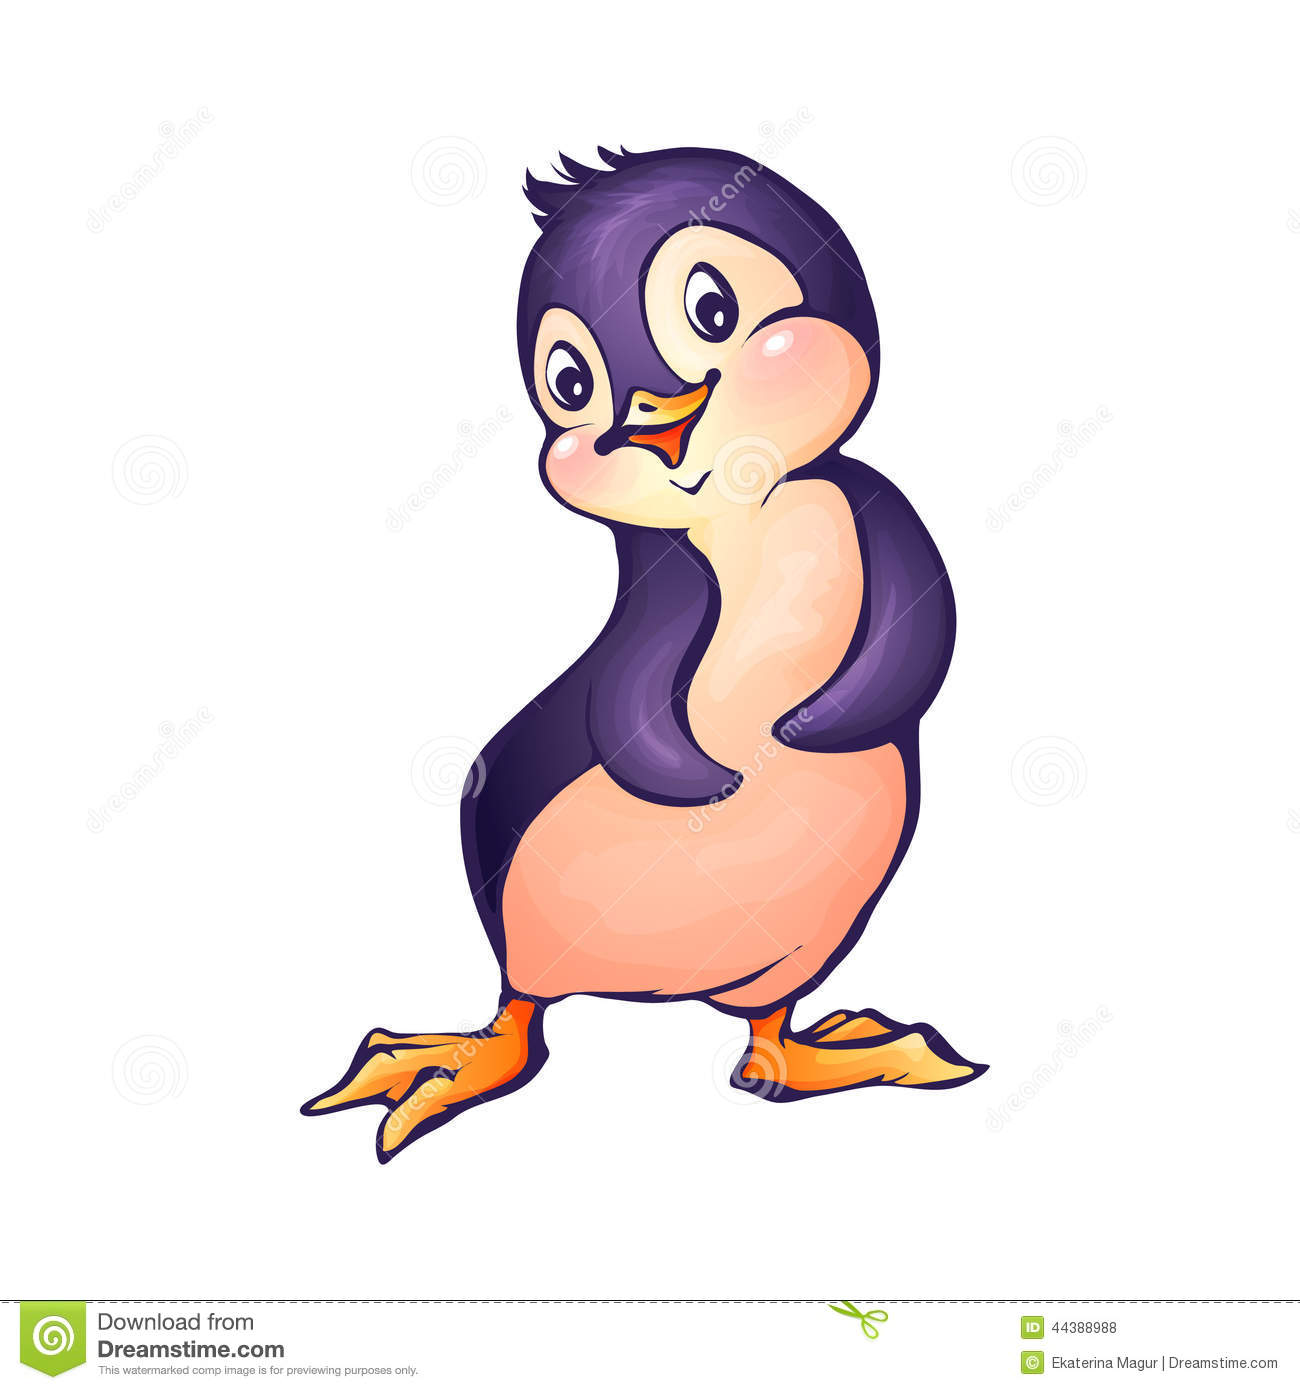 Penguin In Cartoon Style On Transparent Background Mr No Pr No 2 465 3